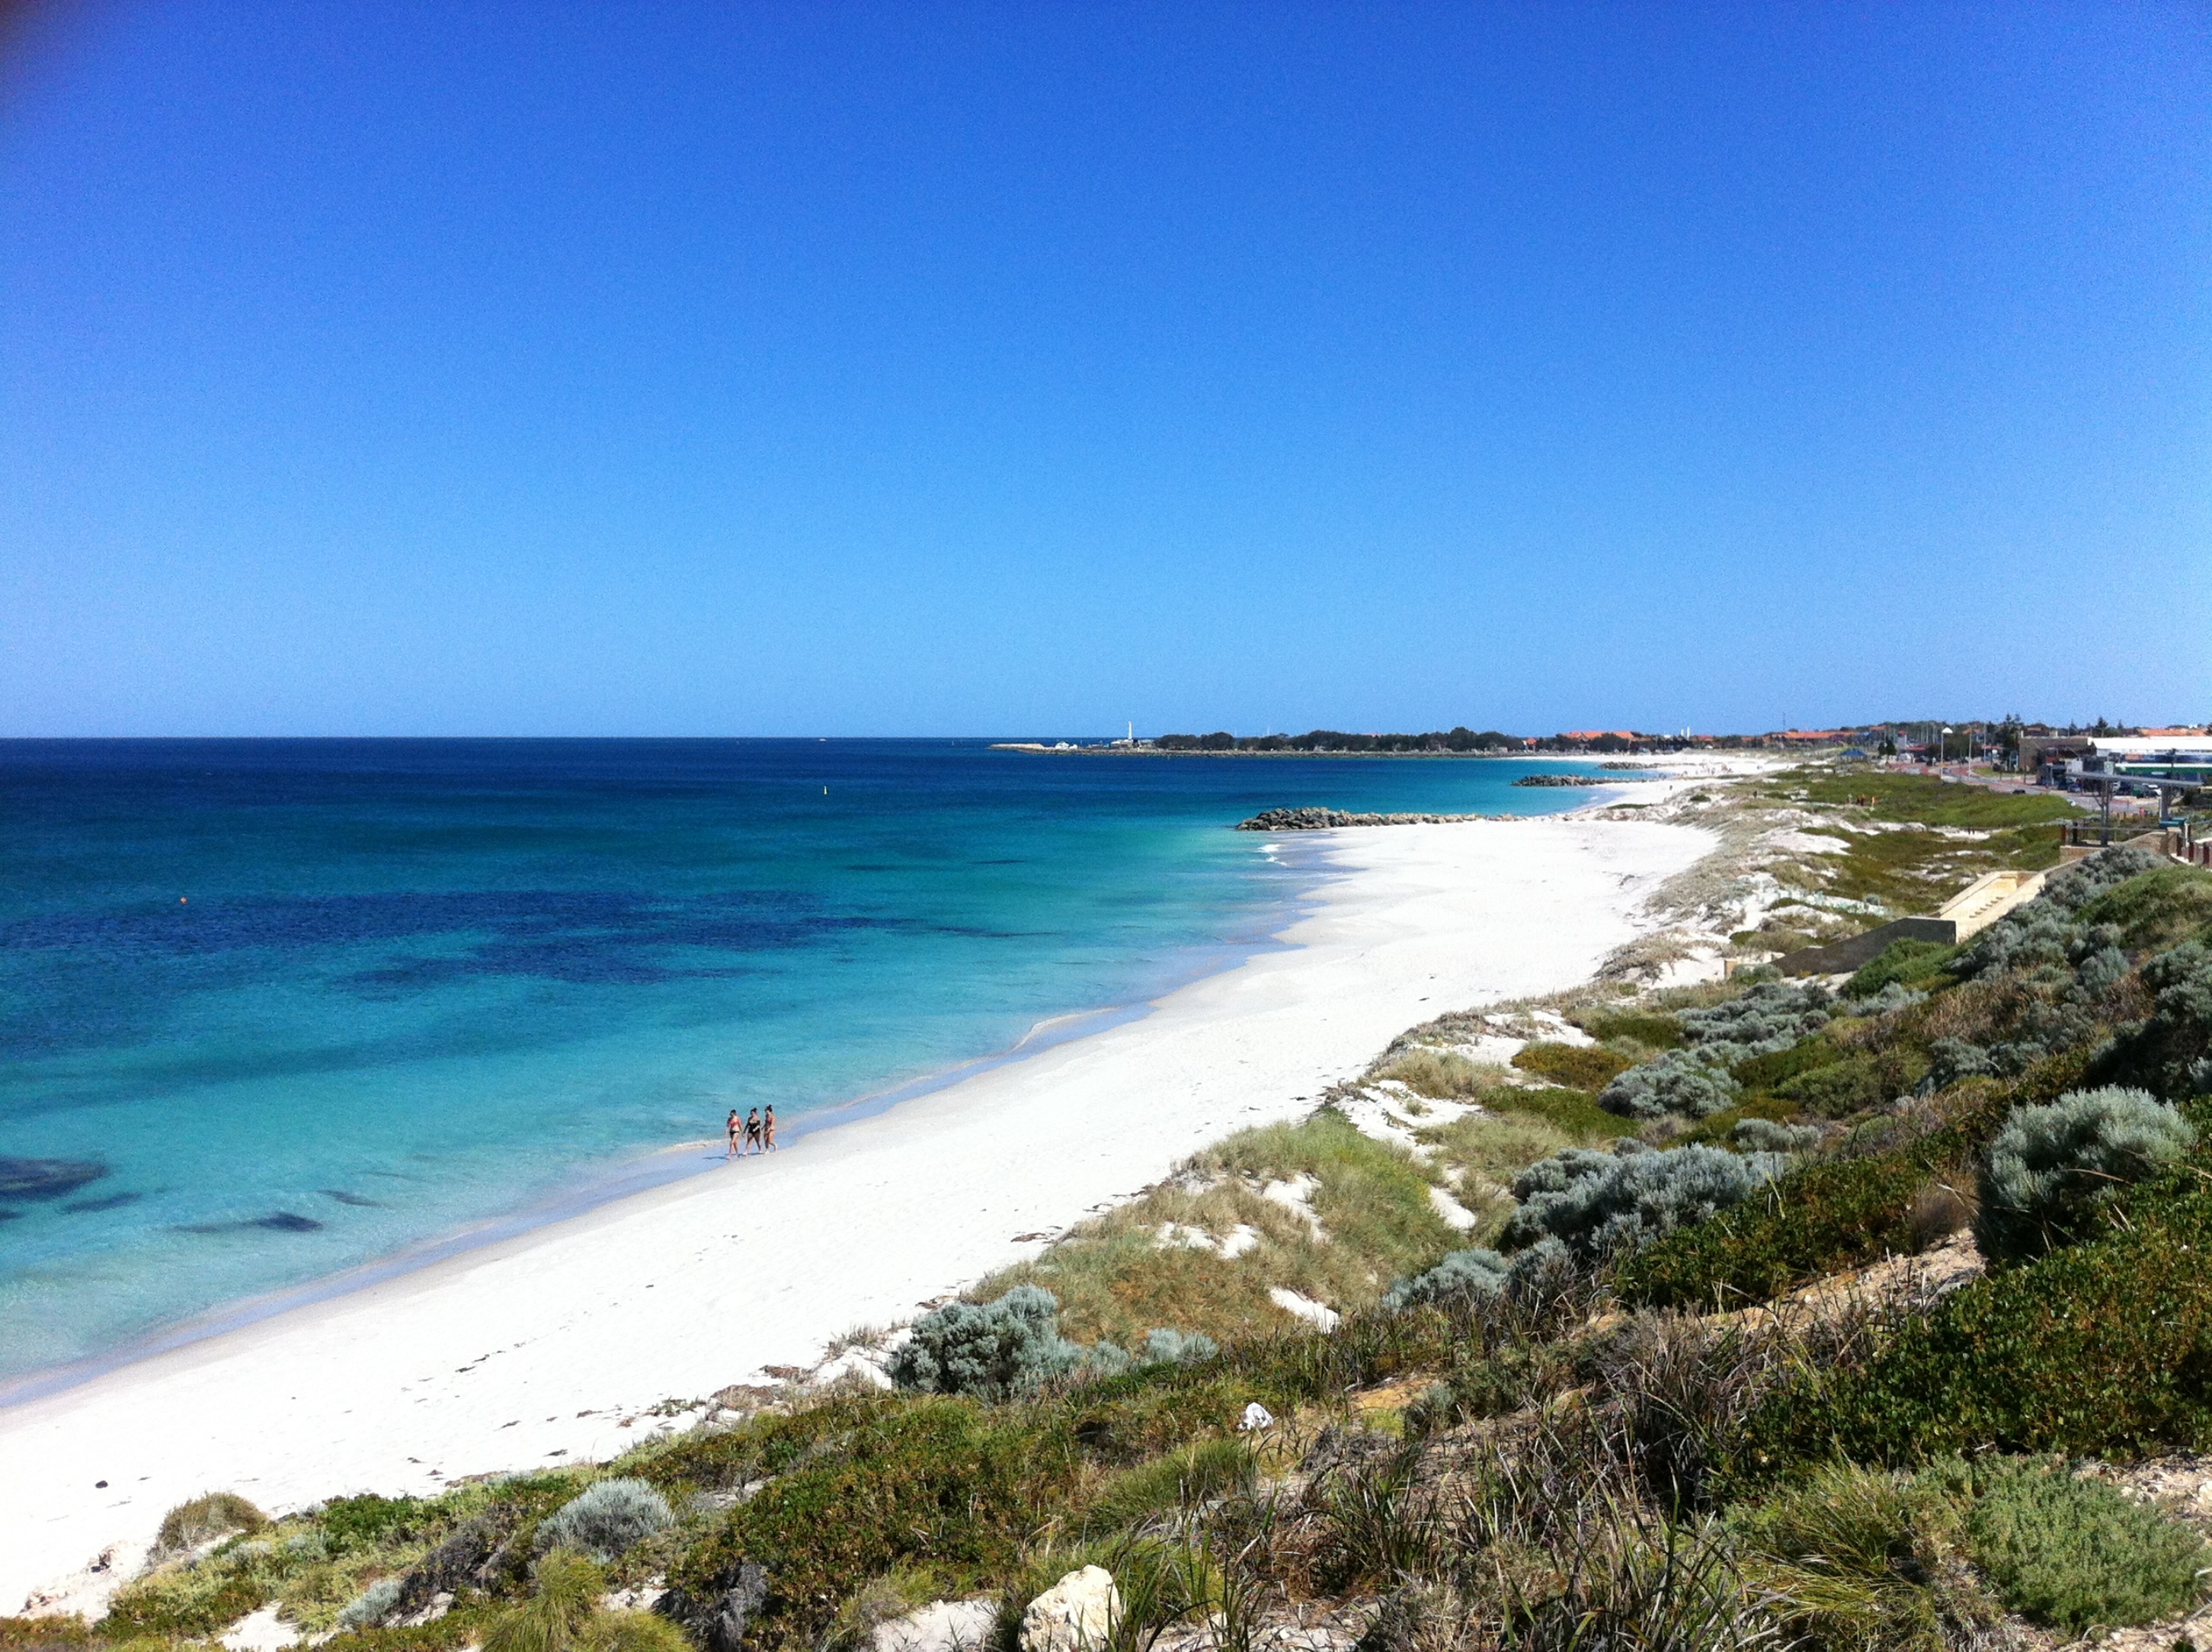 Make the most of your stay at Quality Resort Sorrento Beach ...